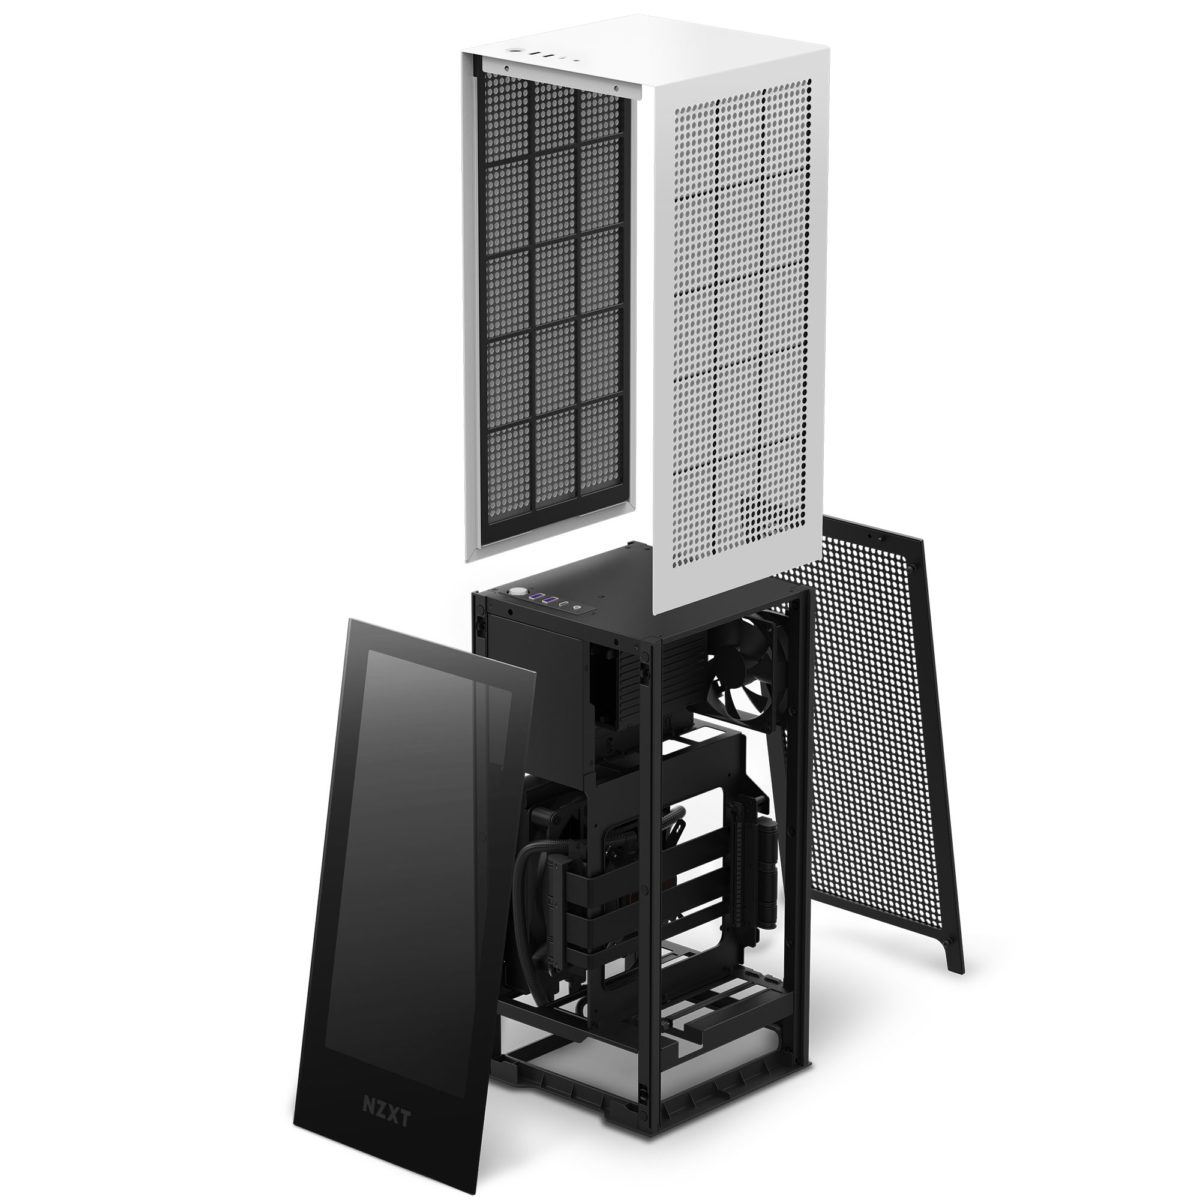 Nzxt Releases Updated H1 V2 Itx Chassis